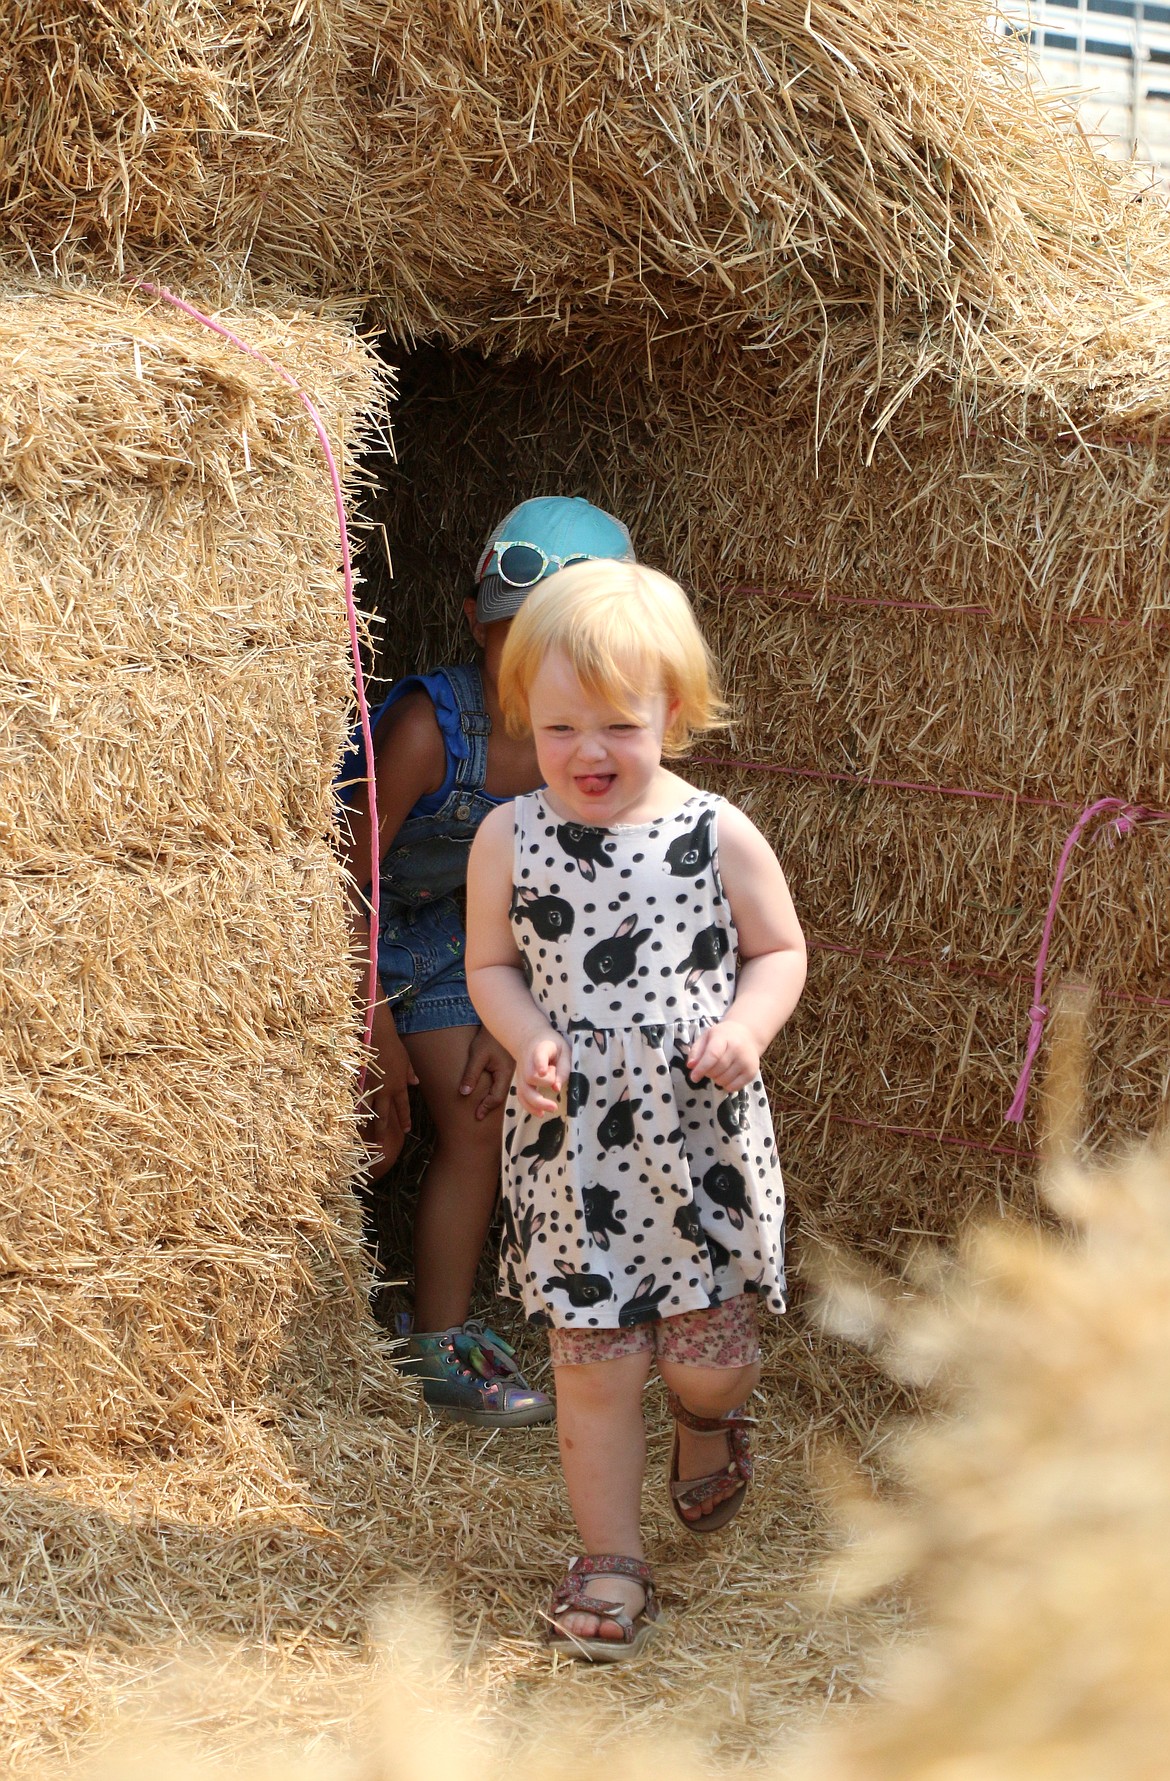 A young duo races through the tunnel of a hay maze created at the Bonner County Fair for the young and young at heart to play in.